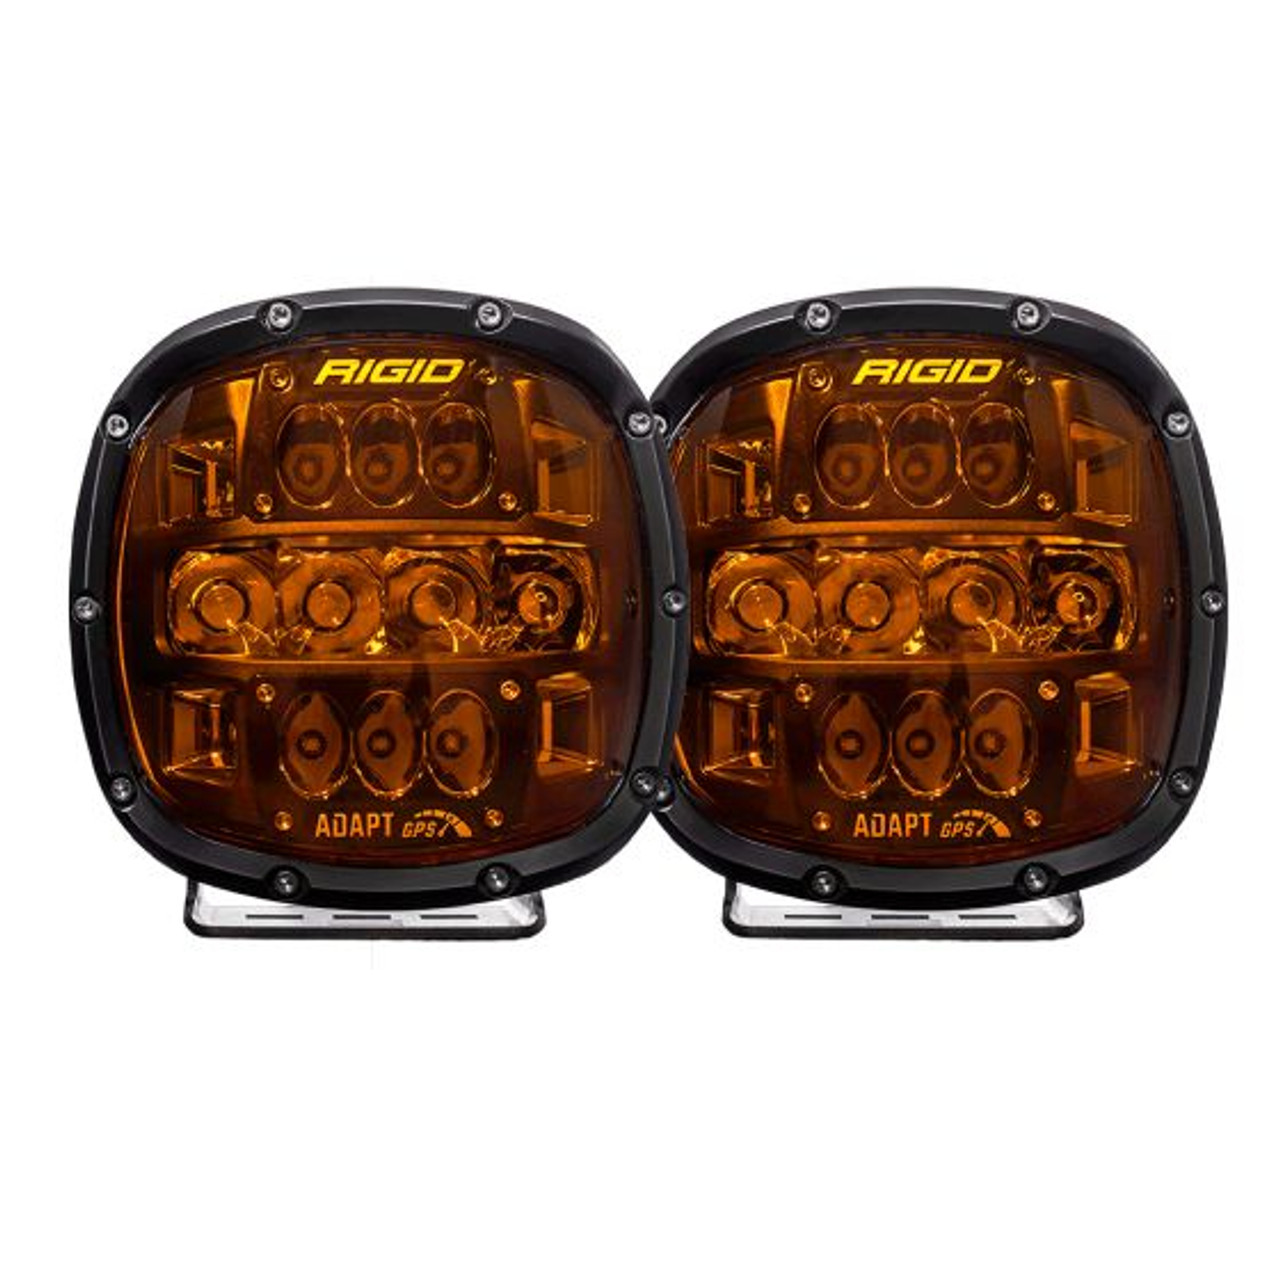 Rigid Industries 300515 Adapt XP with Amber PRO Lens Pair